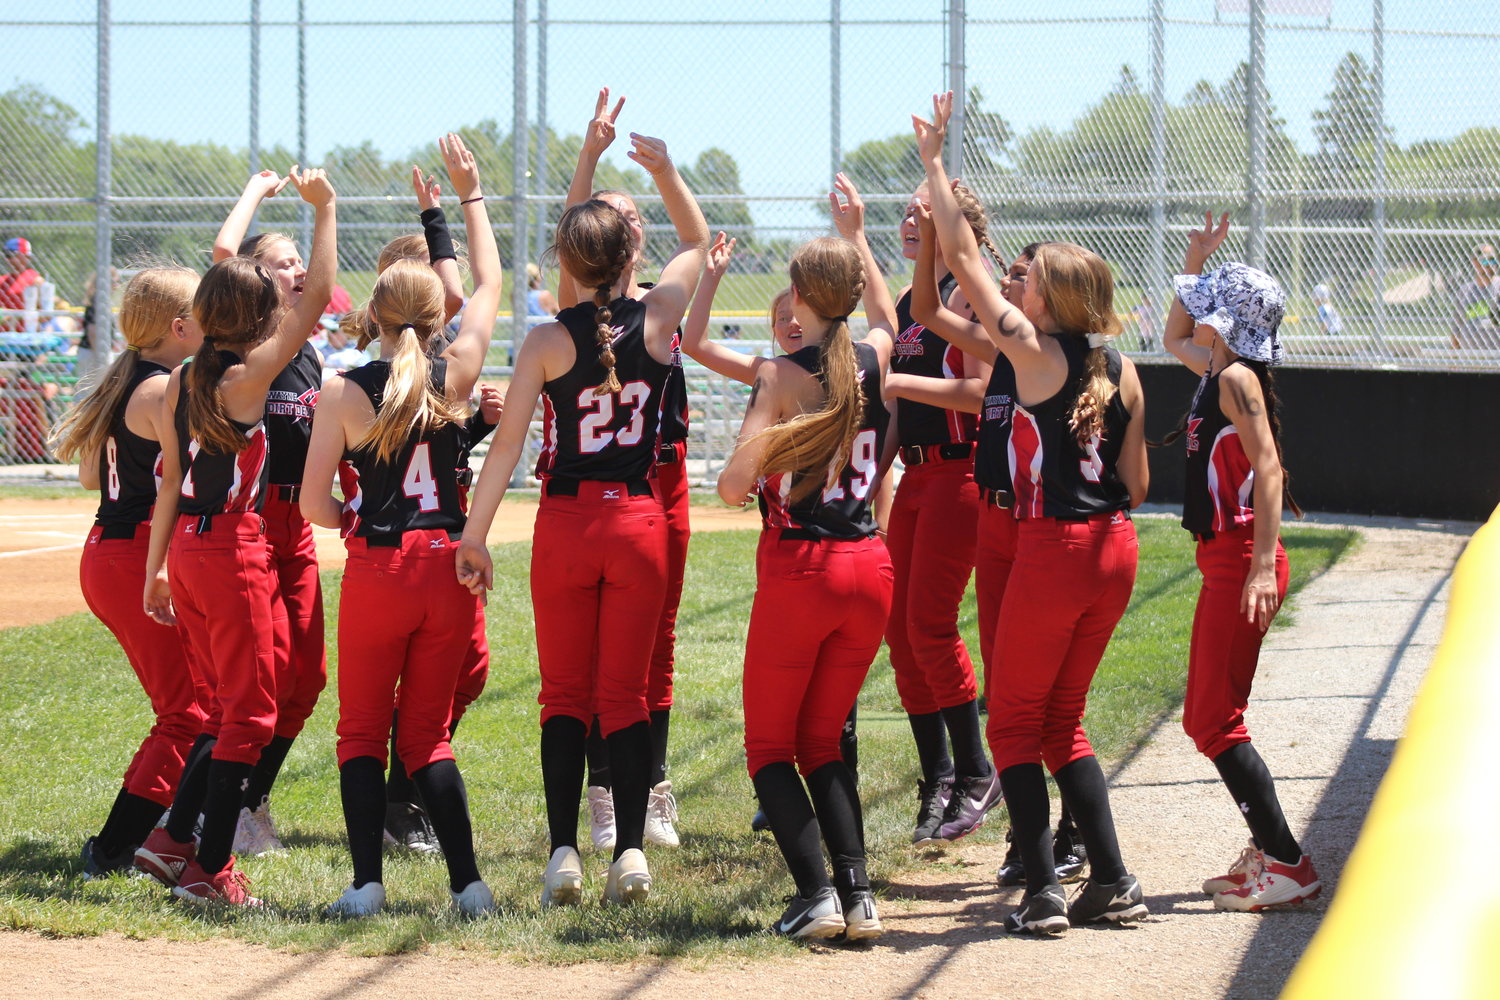 The 12-under softball squad gets fired up prior to taking the field during action at the district tournament.